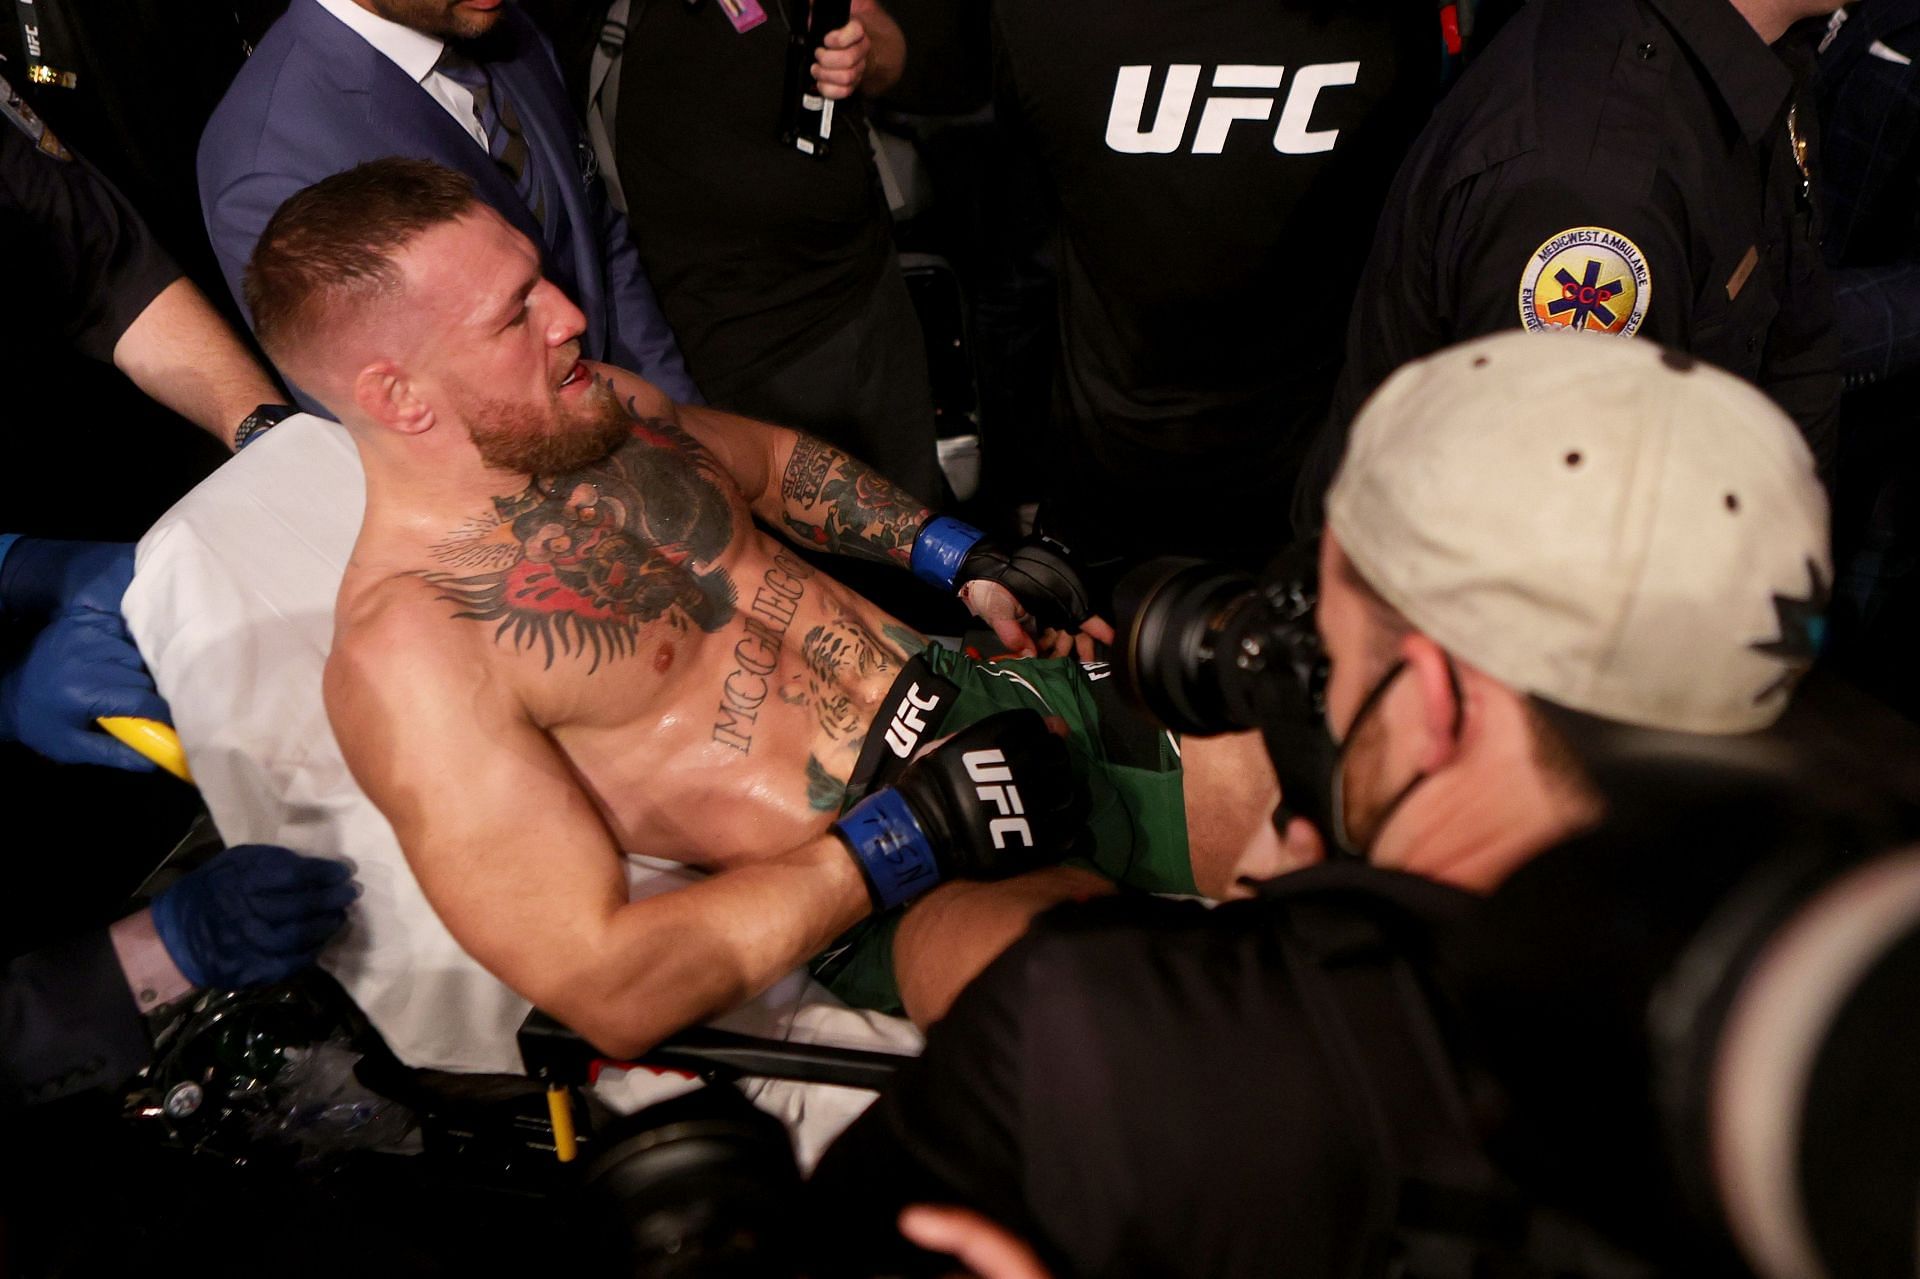 Conor McGregor suffered a serious leg imjury in his fight with Dustin Poirier at UFC 264